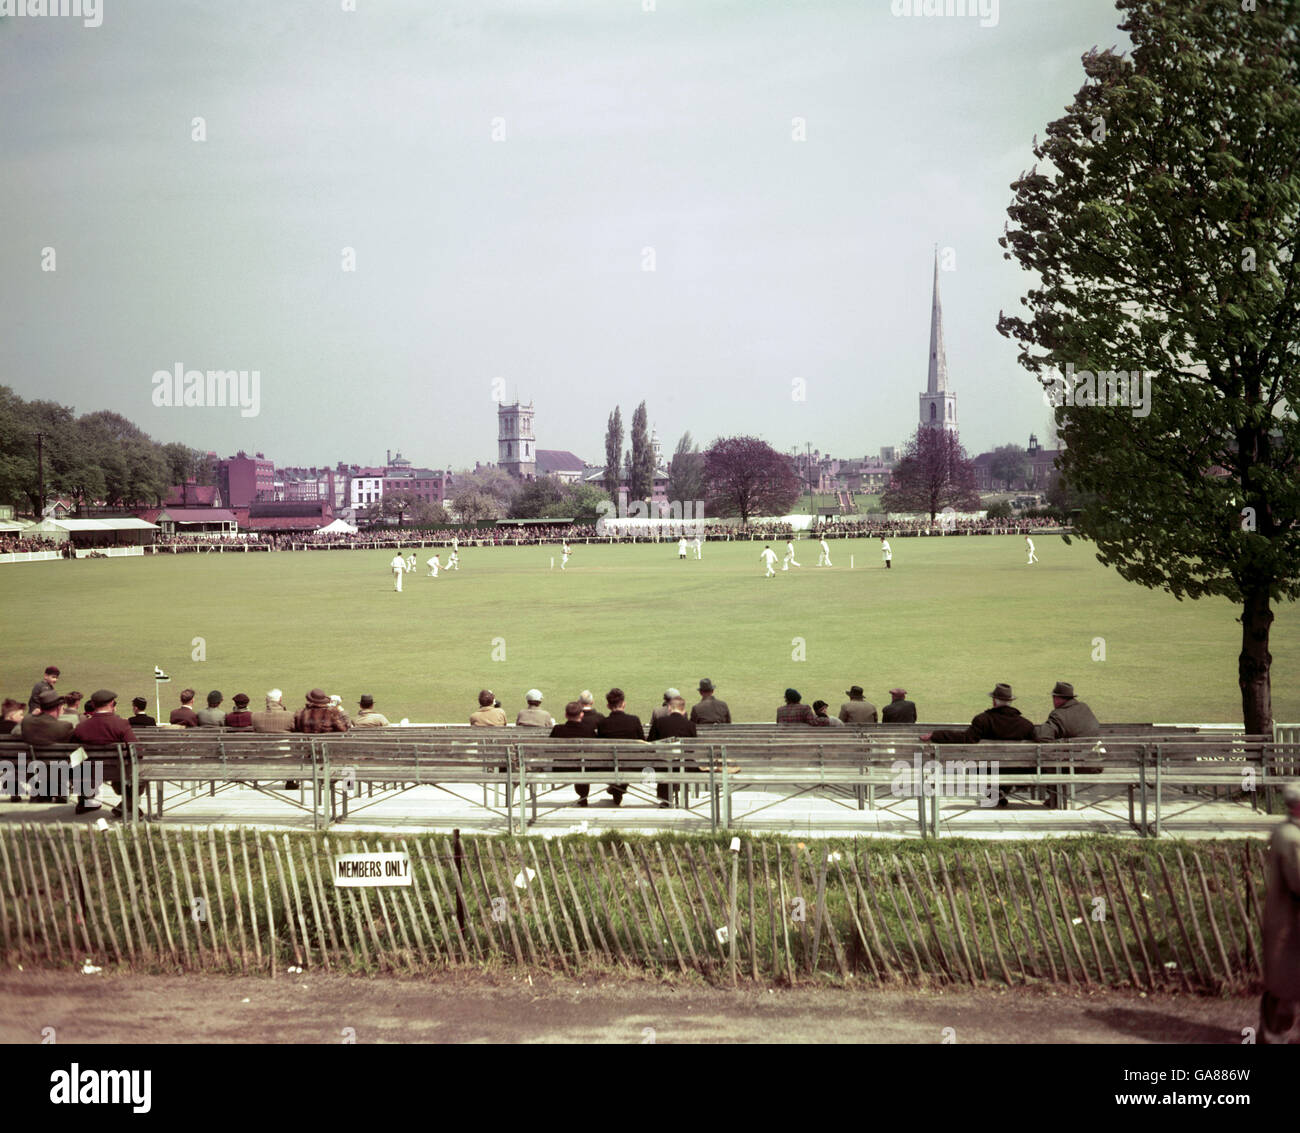 Cricket - Worcestershire County Cricket Club - Photocall. Cricket à Worcester en 1953. Banque D'Images